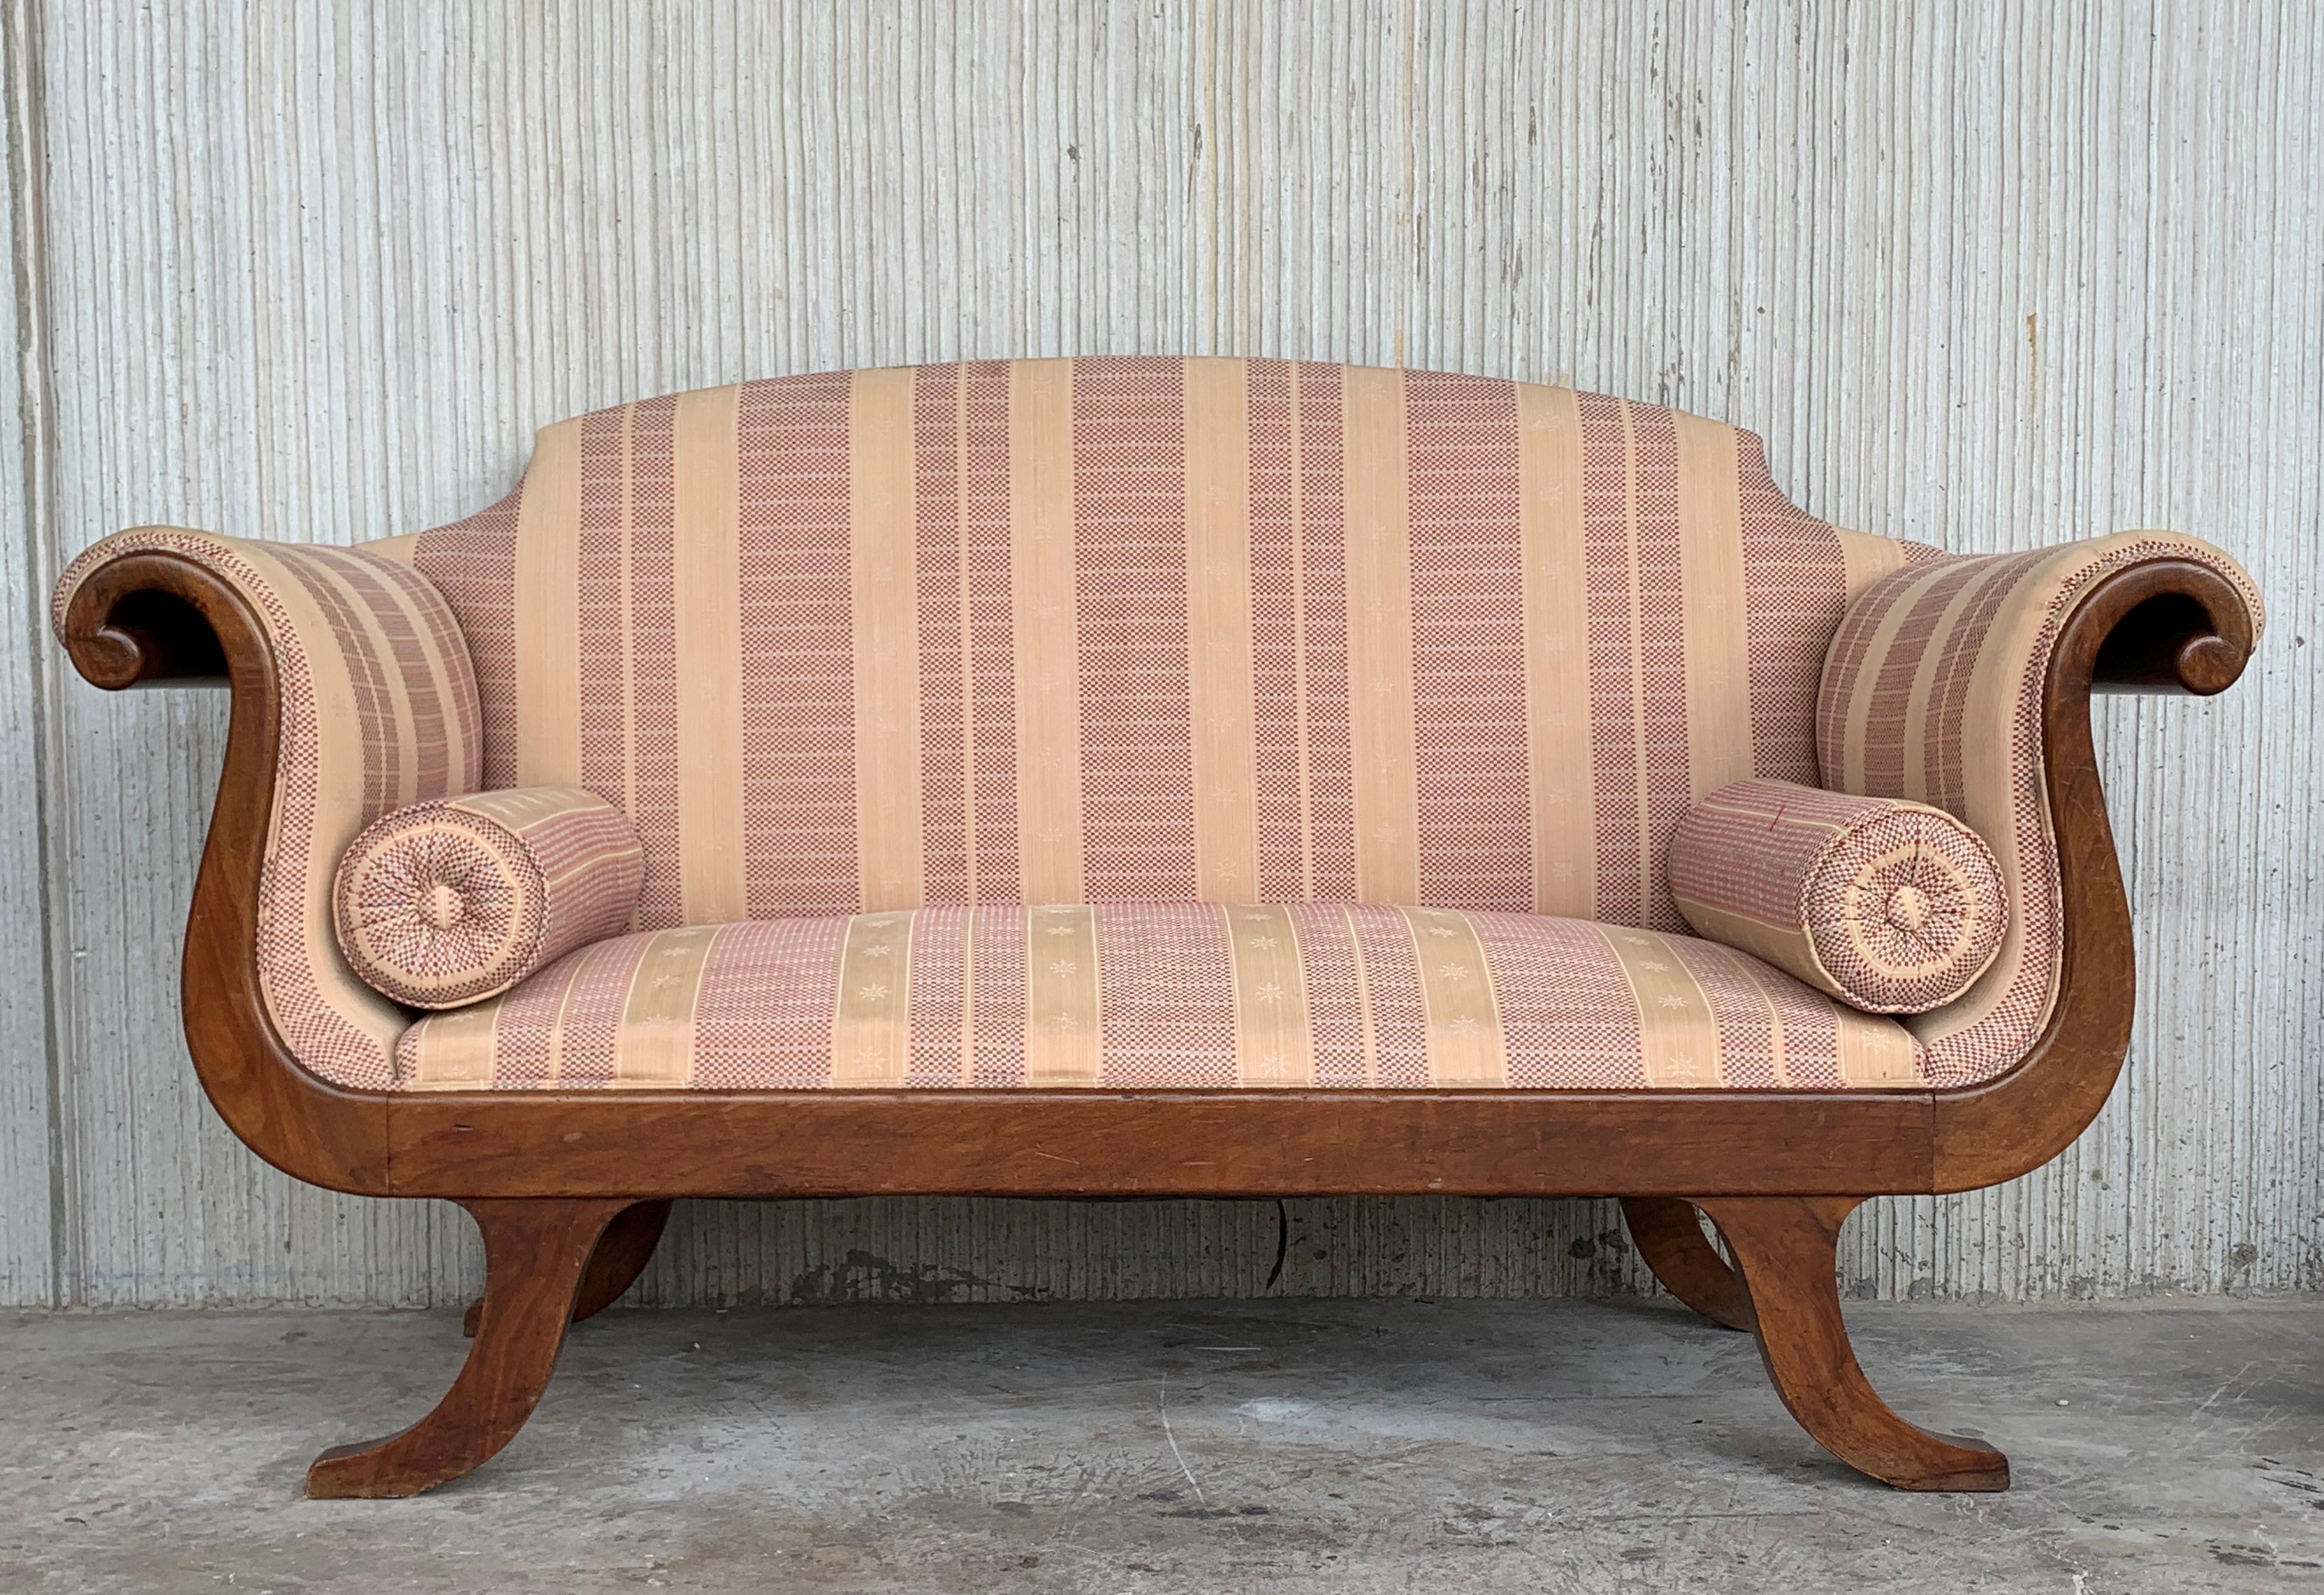 Early 20th Regency style with fluted scrolled wood arms sofa or setee.
Reupholstered.